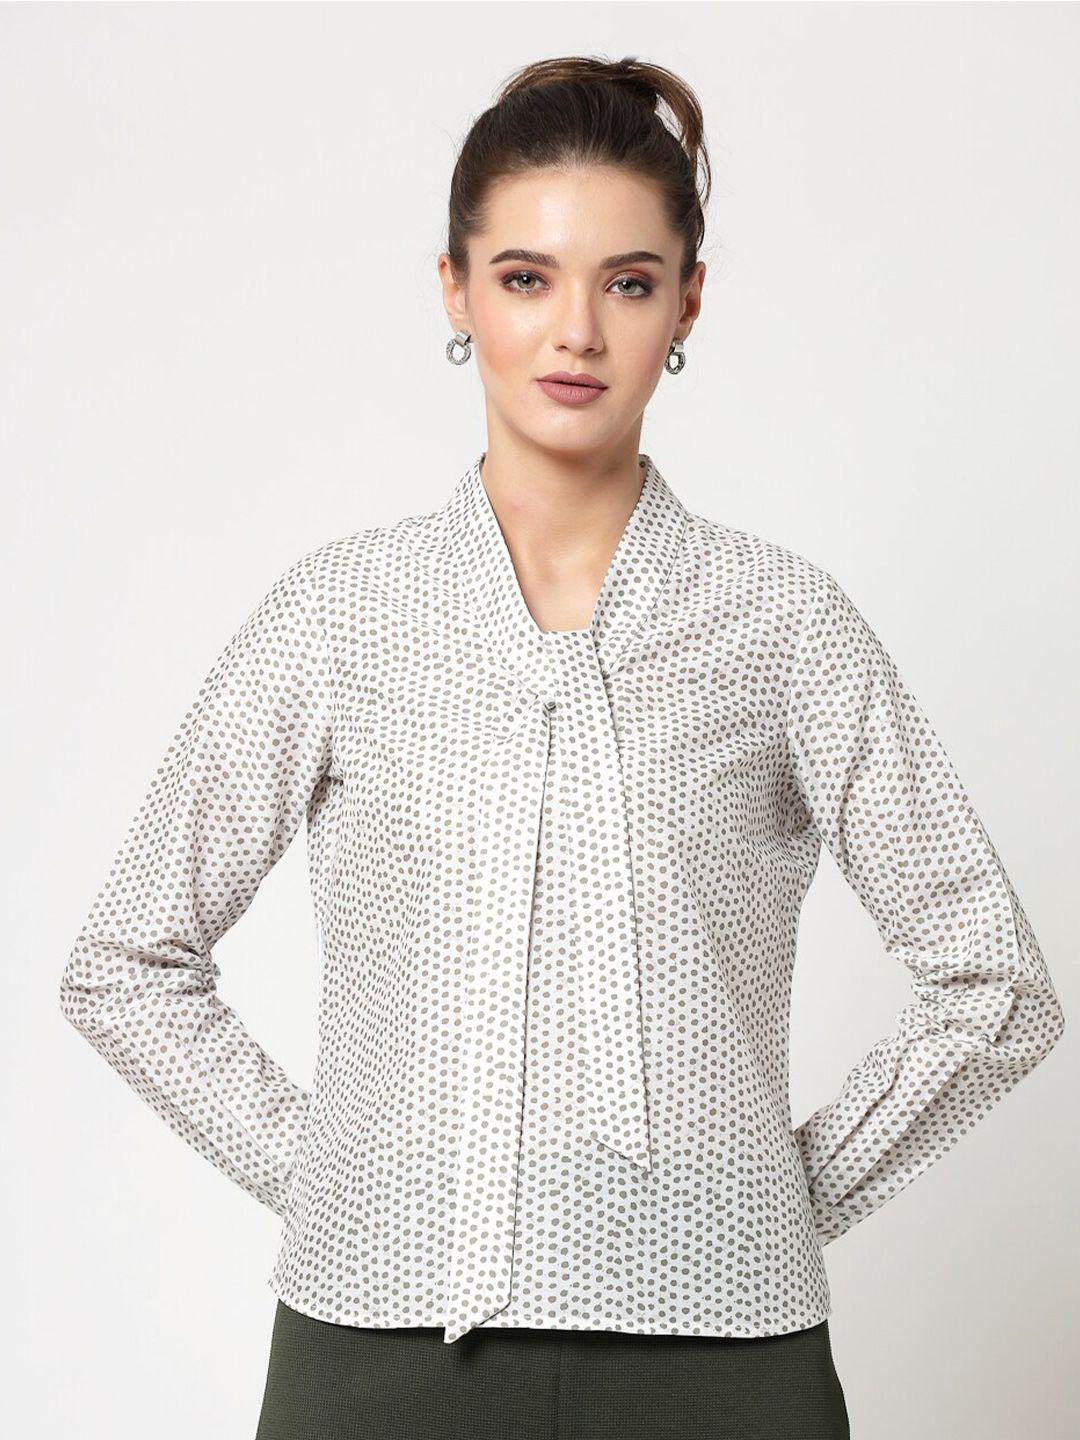 office & you geometric printed tie-up neck shirt style top